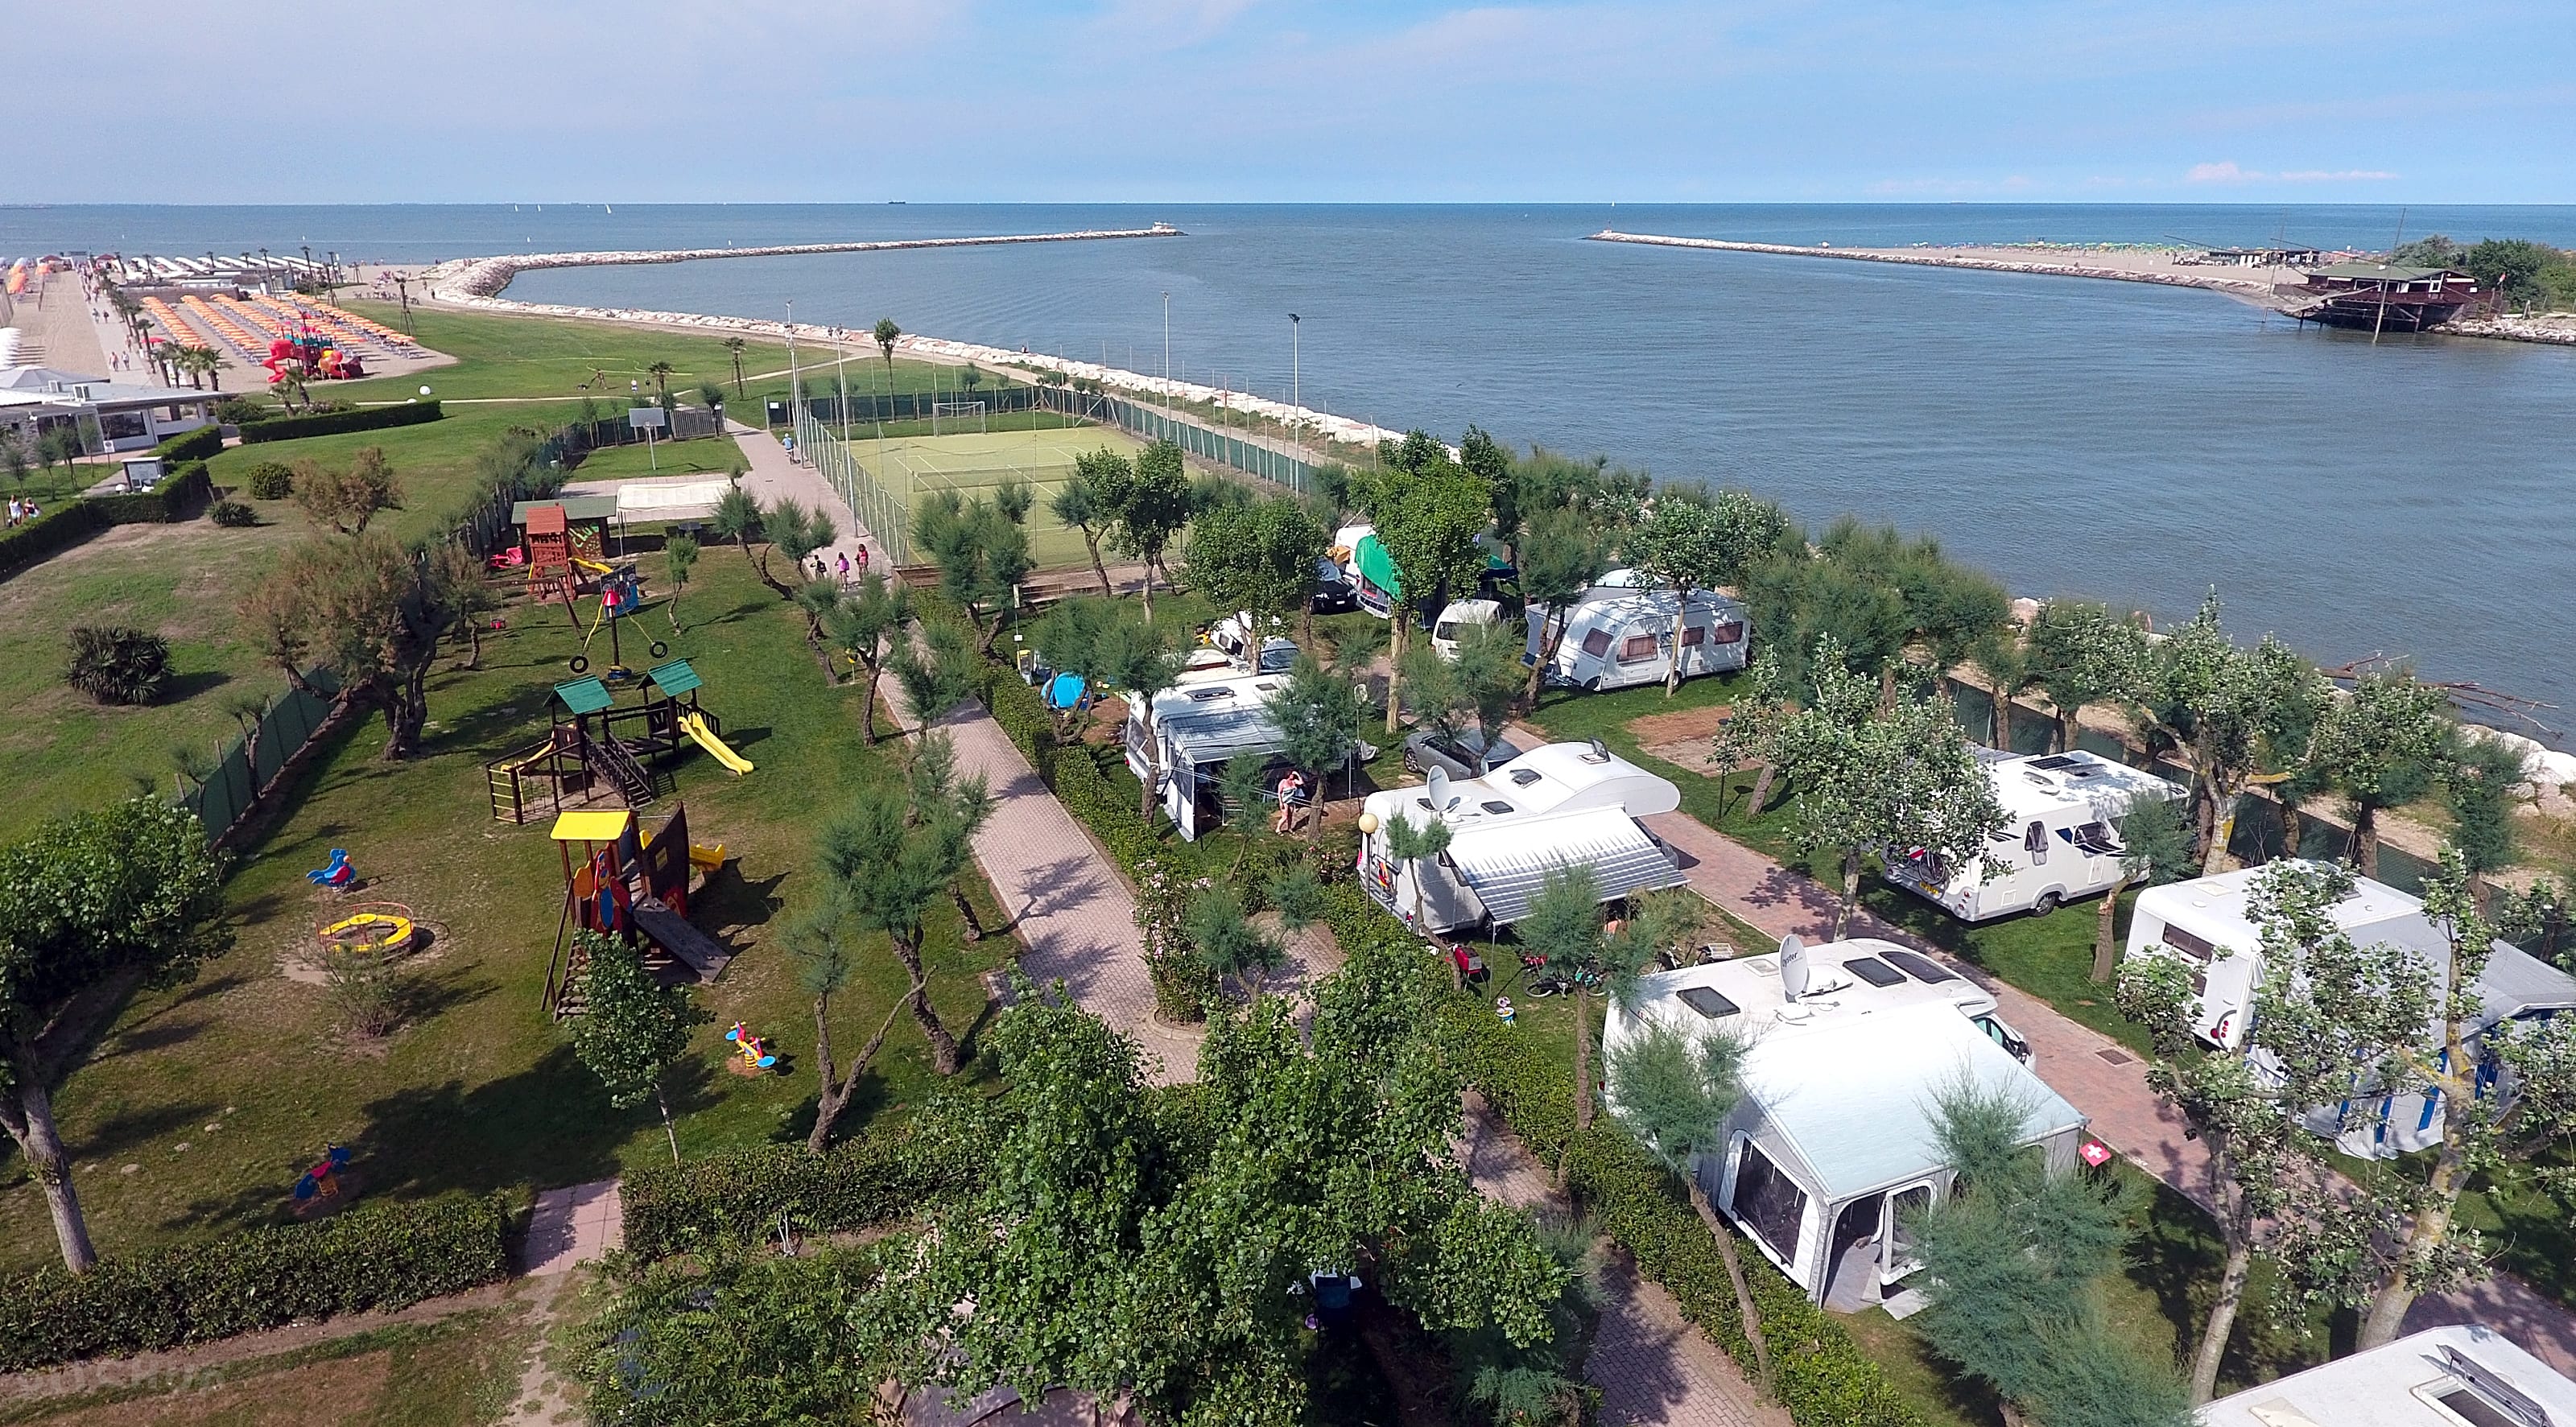 Camping Oasi Chioggia Pitchup